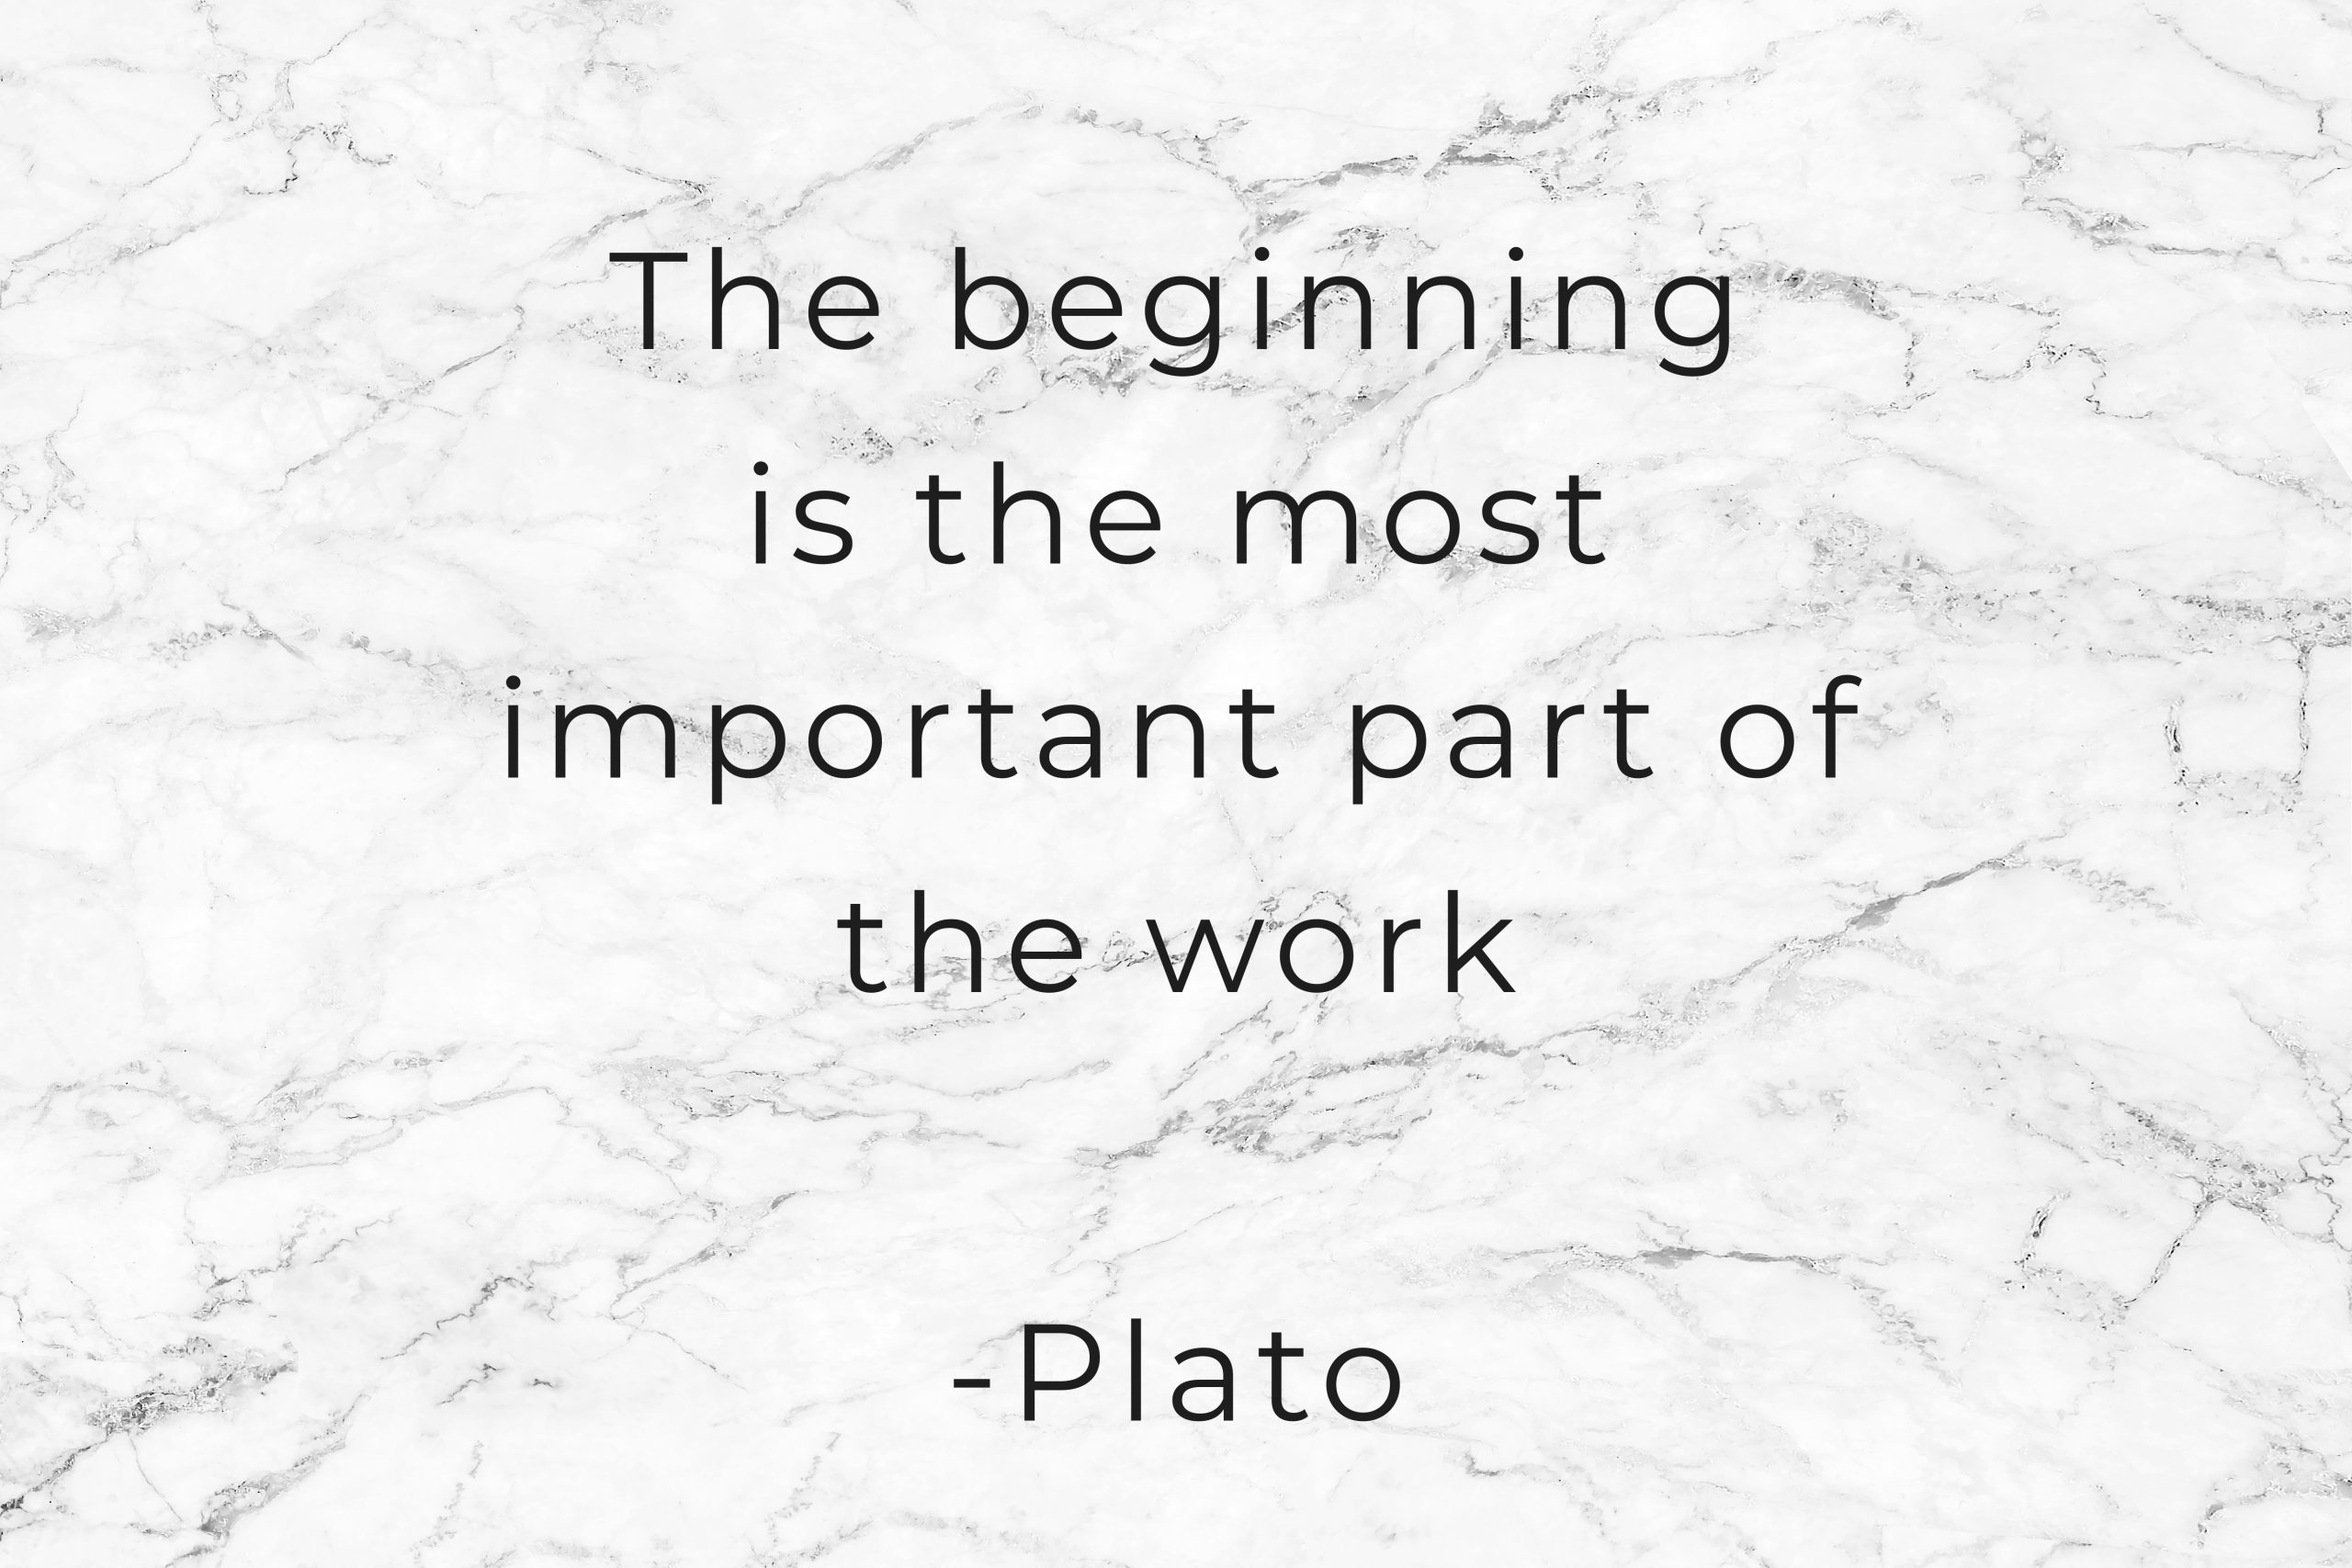 The beginning is the most important part of the work -plato